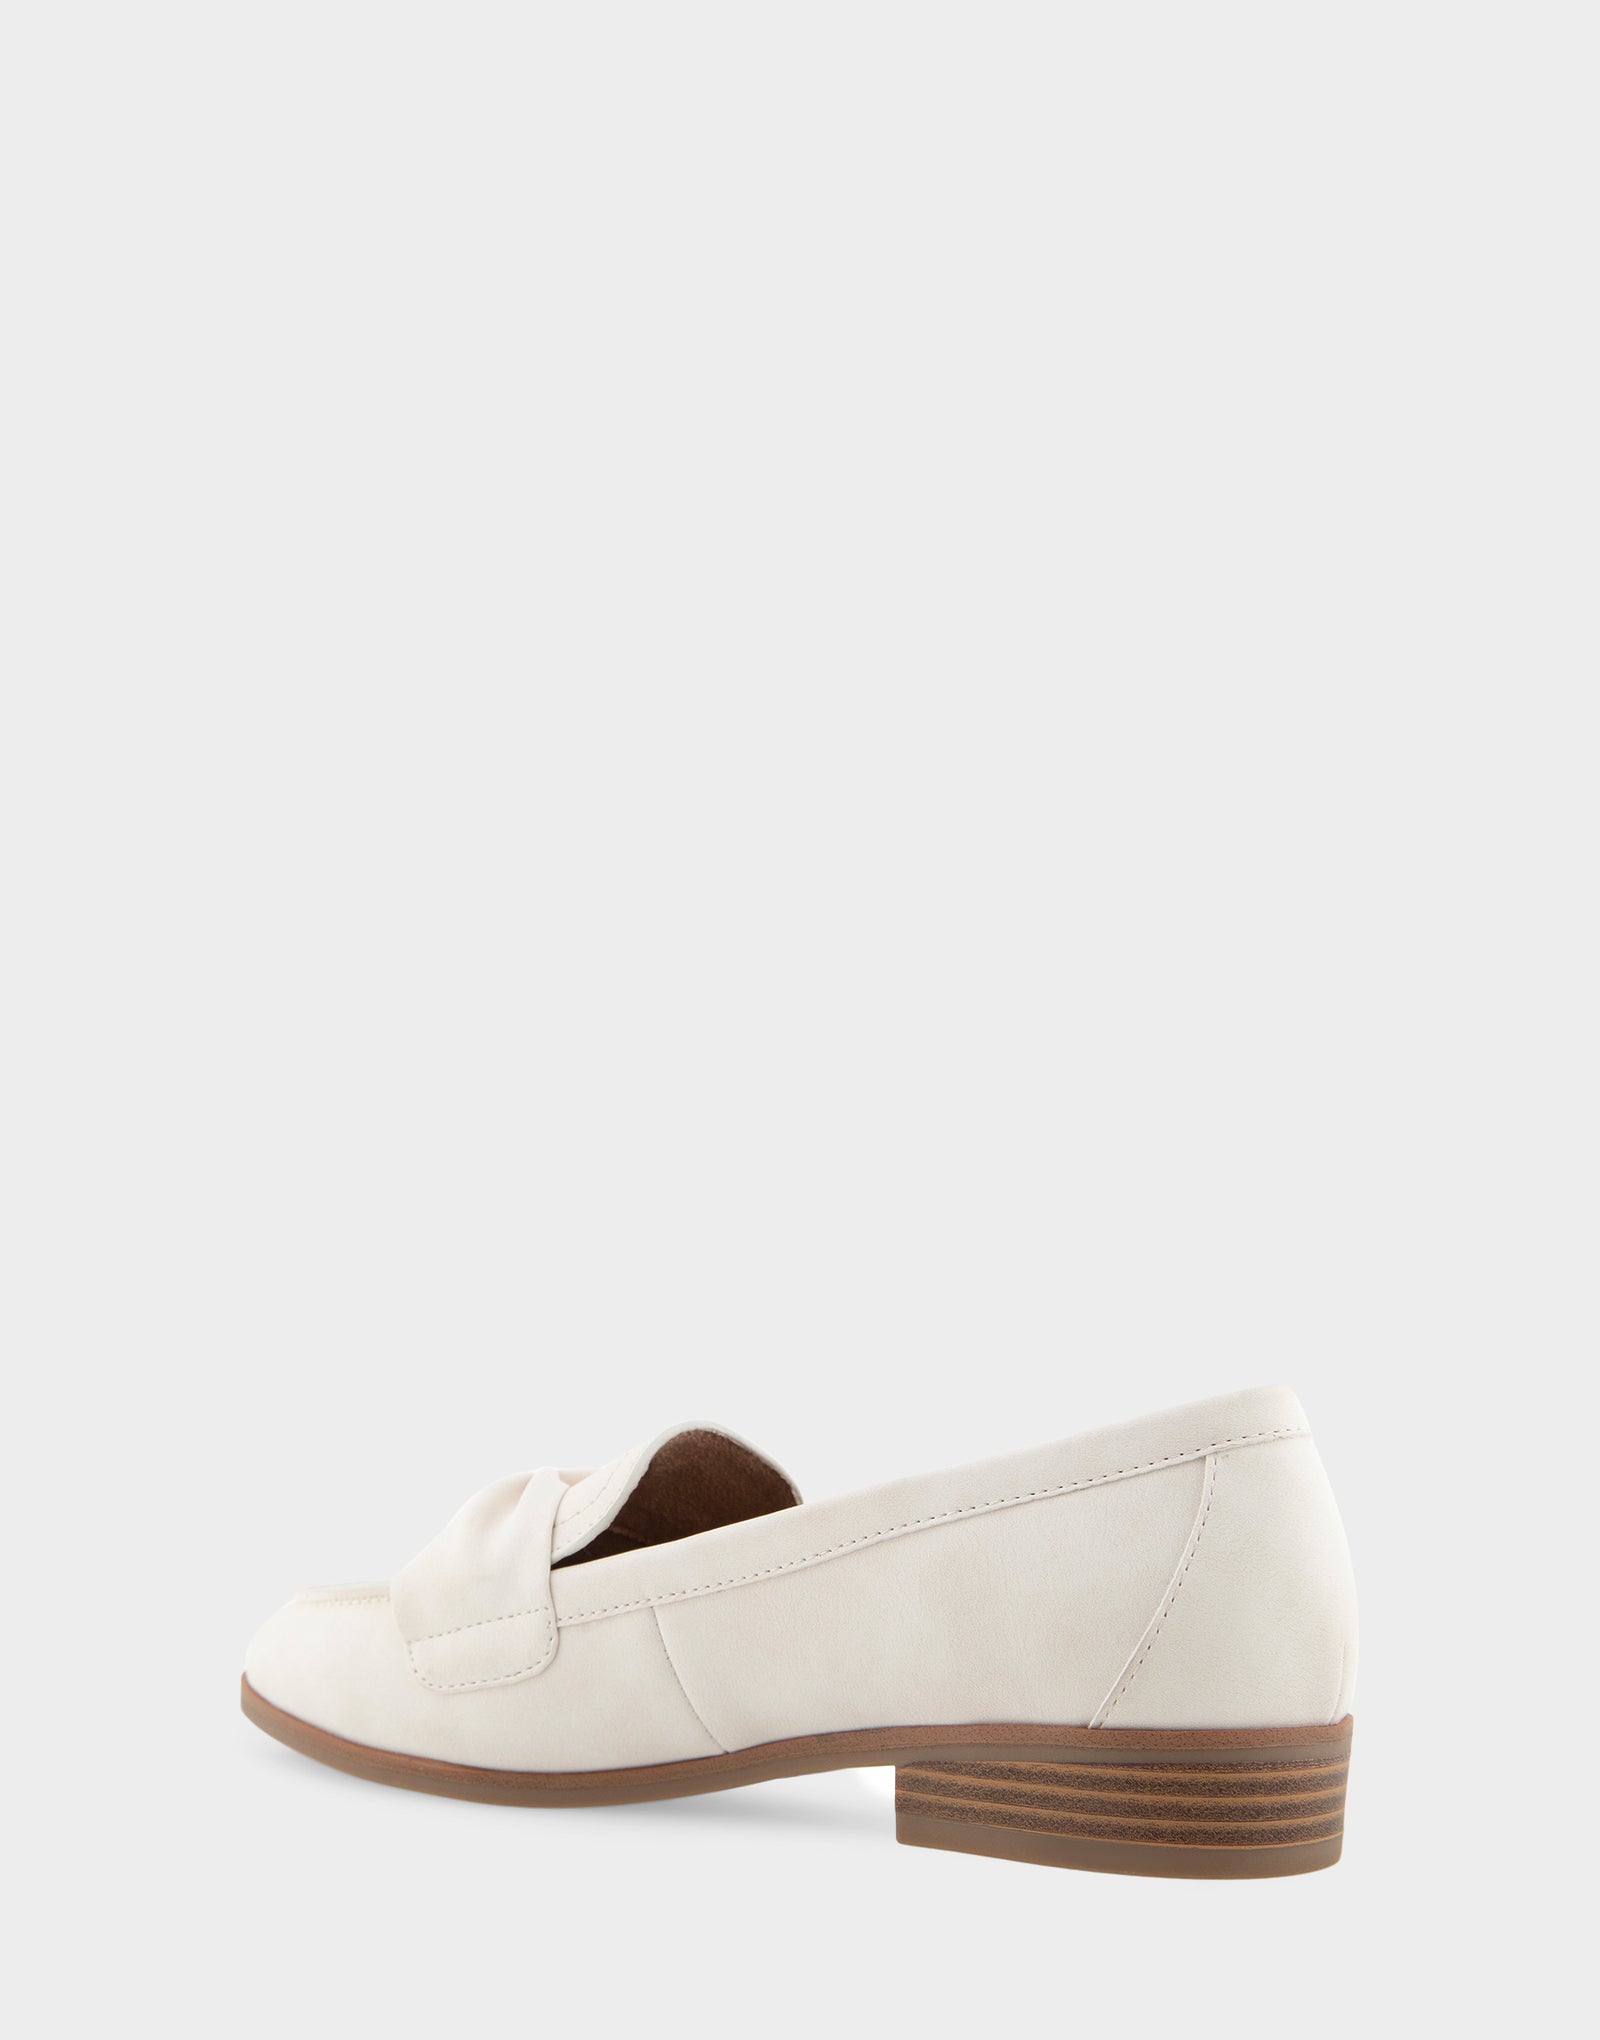 Women's Tailored Loafer in Eggnog Faux Leather